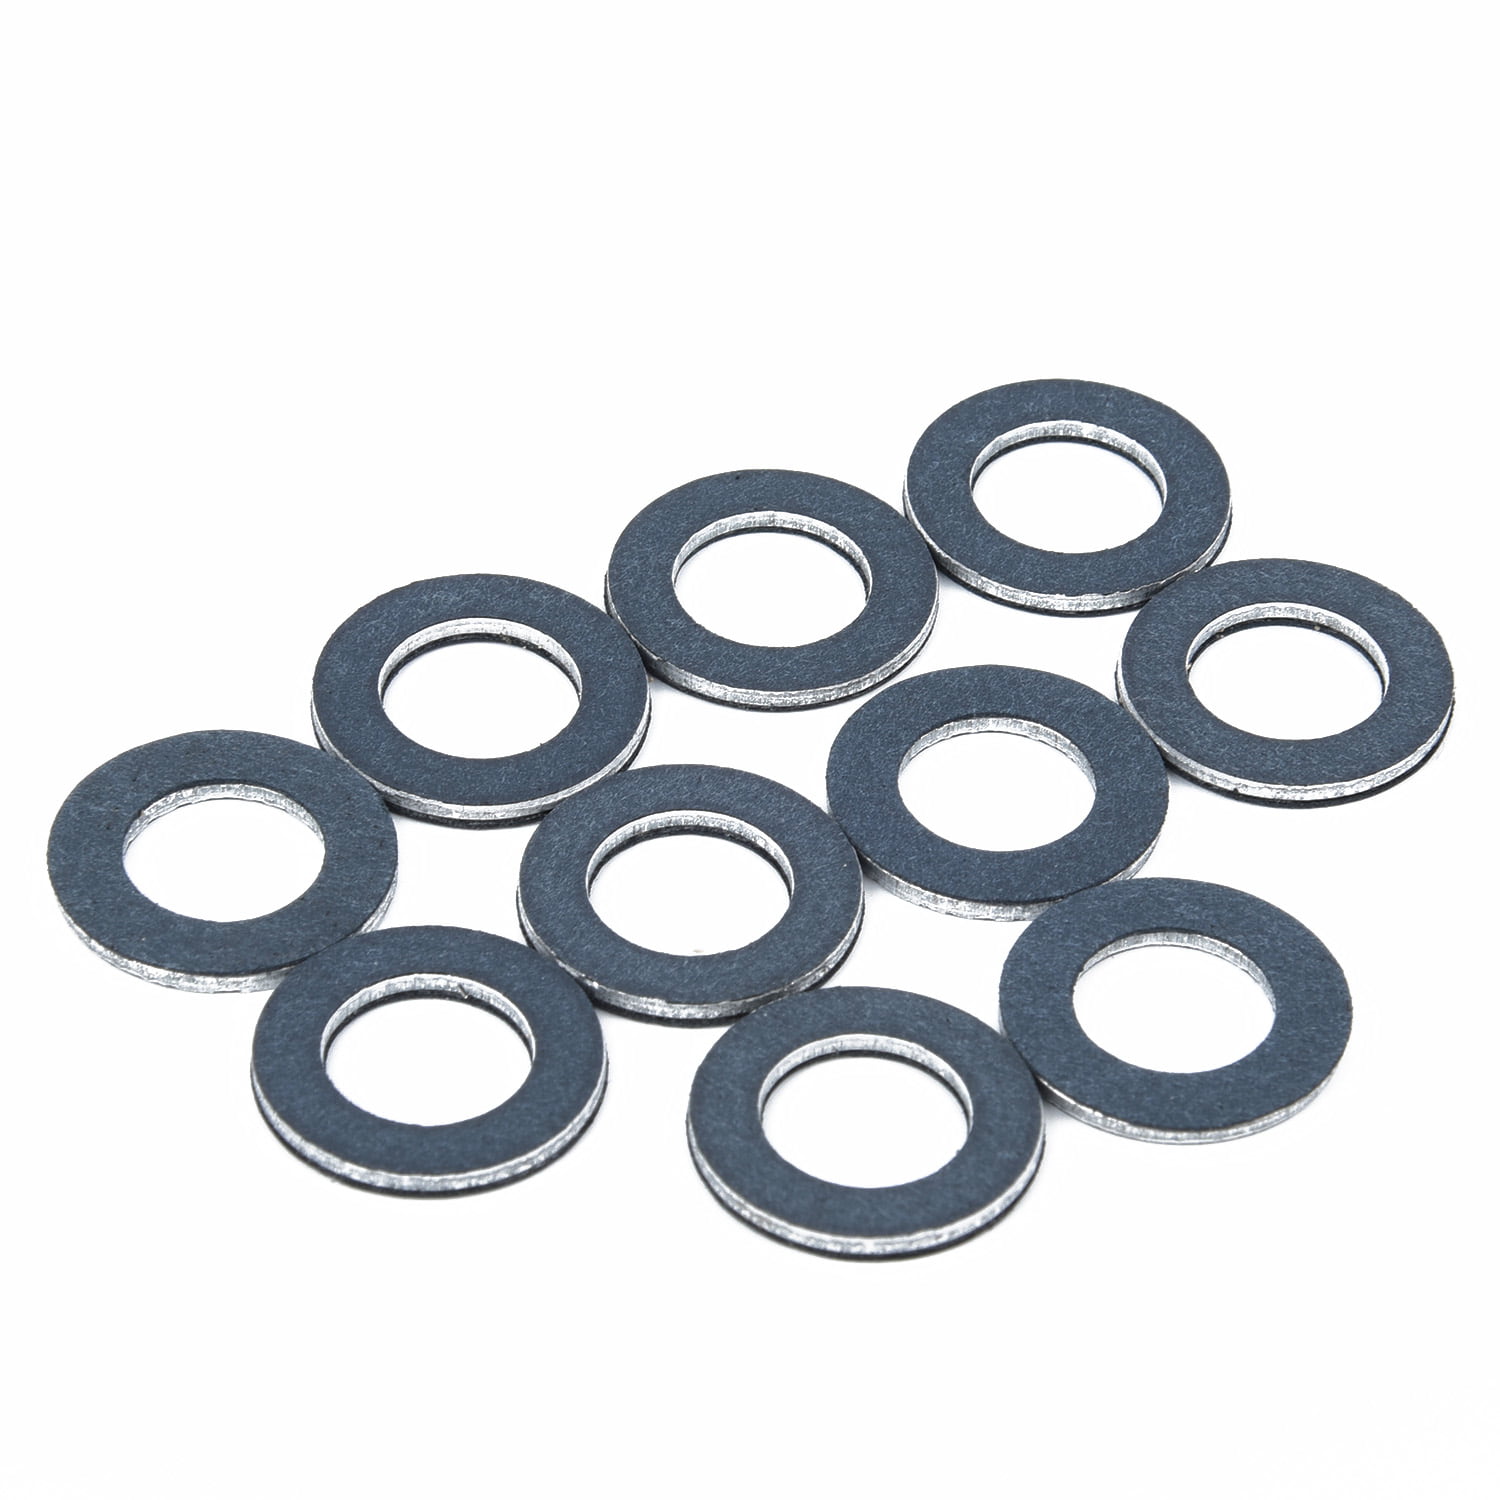 10pcs Car Oil Drain Plug Gaskets gaskets90430-12031 gaskets,Oil 90430-12031 Toyota90430-12031 gaskets,Oil for Toyota 4Runner/Avalon/Camry/Celica 